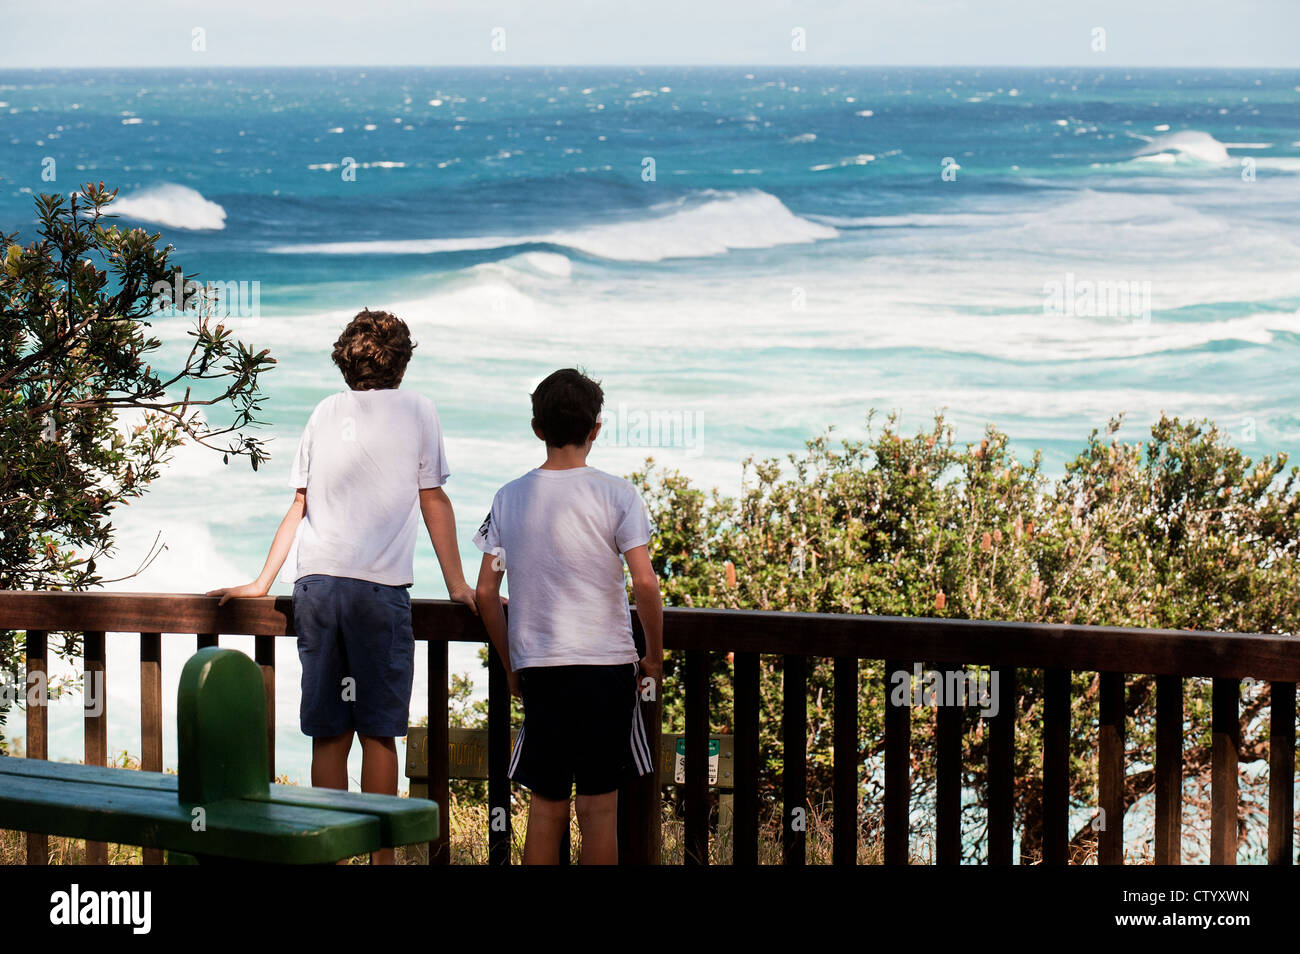 Two young boys looking out over the sea on North Stradbroke Island in Queensland, Australia. Stock Photo